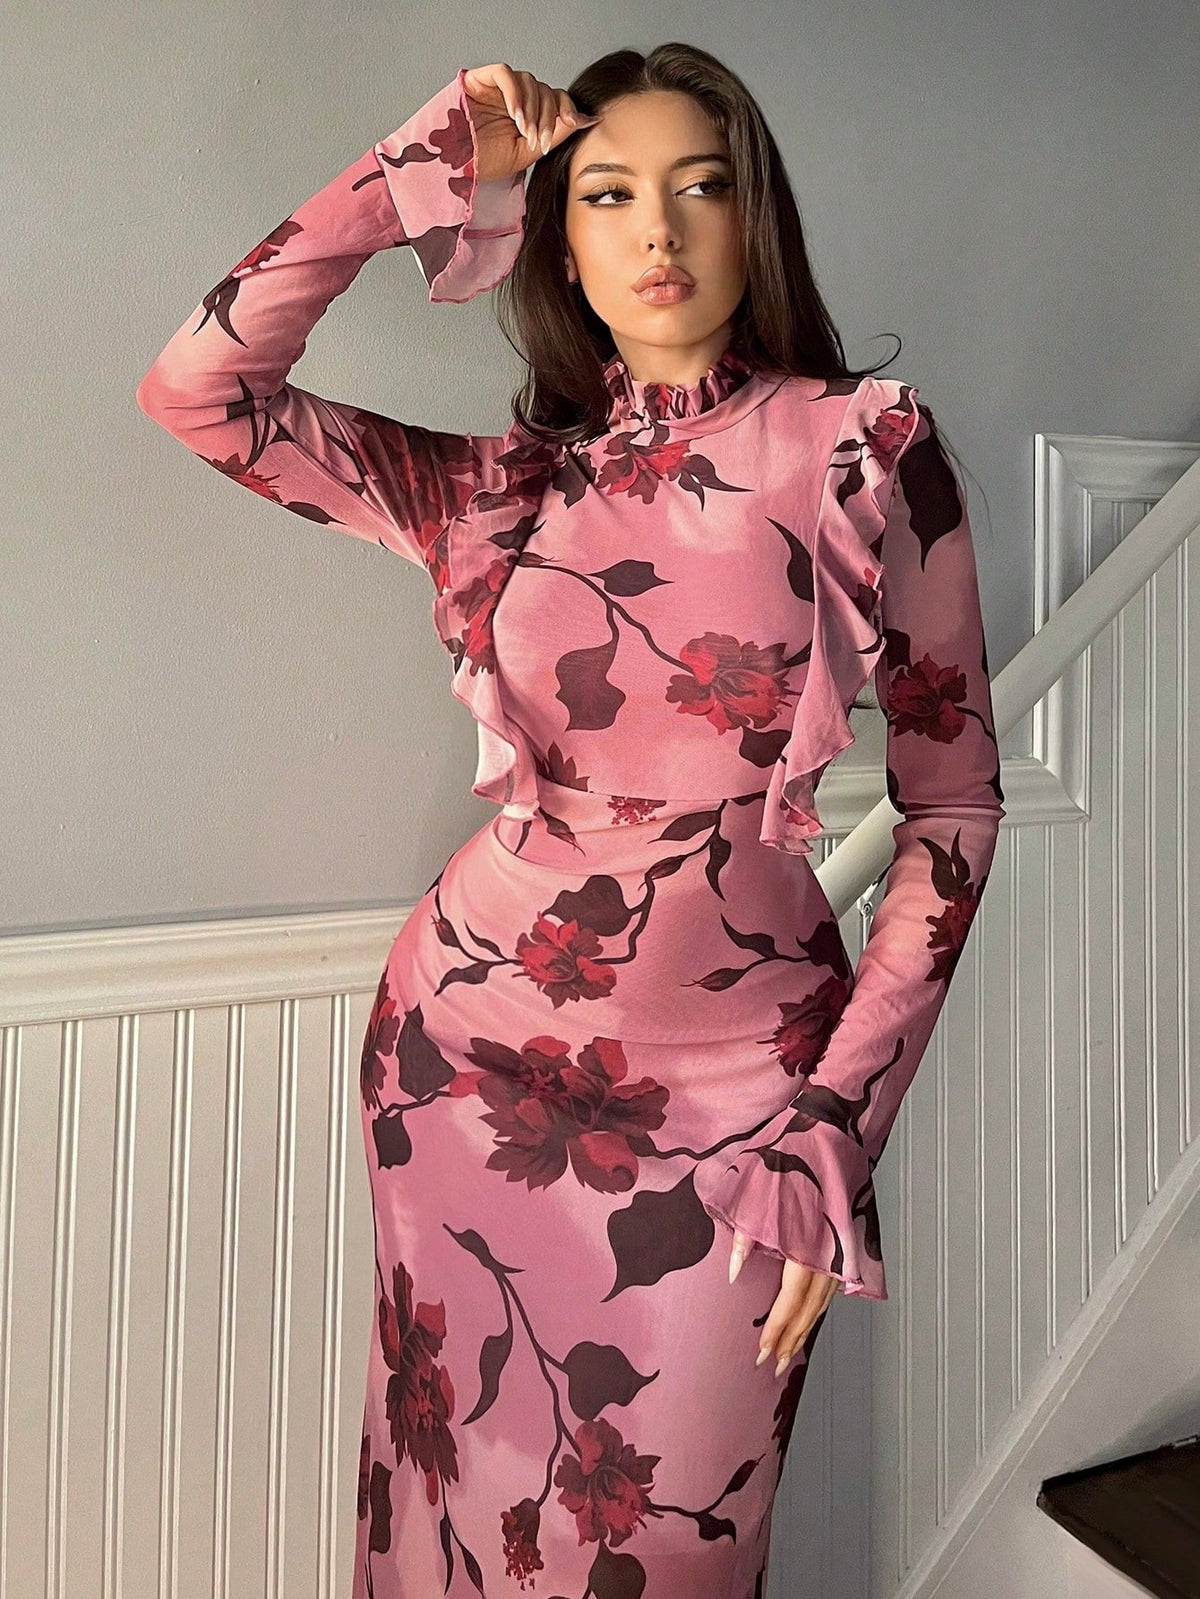 Women's Vintage Floral Print Bodycon Dress With Ruffle Hem And Bell Sleeves